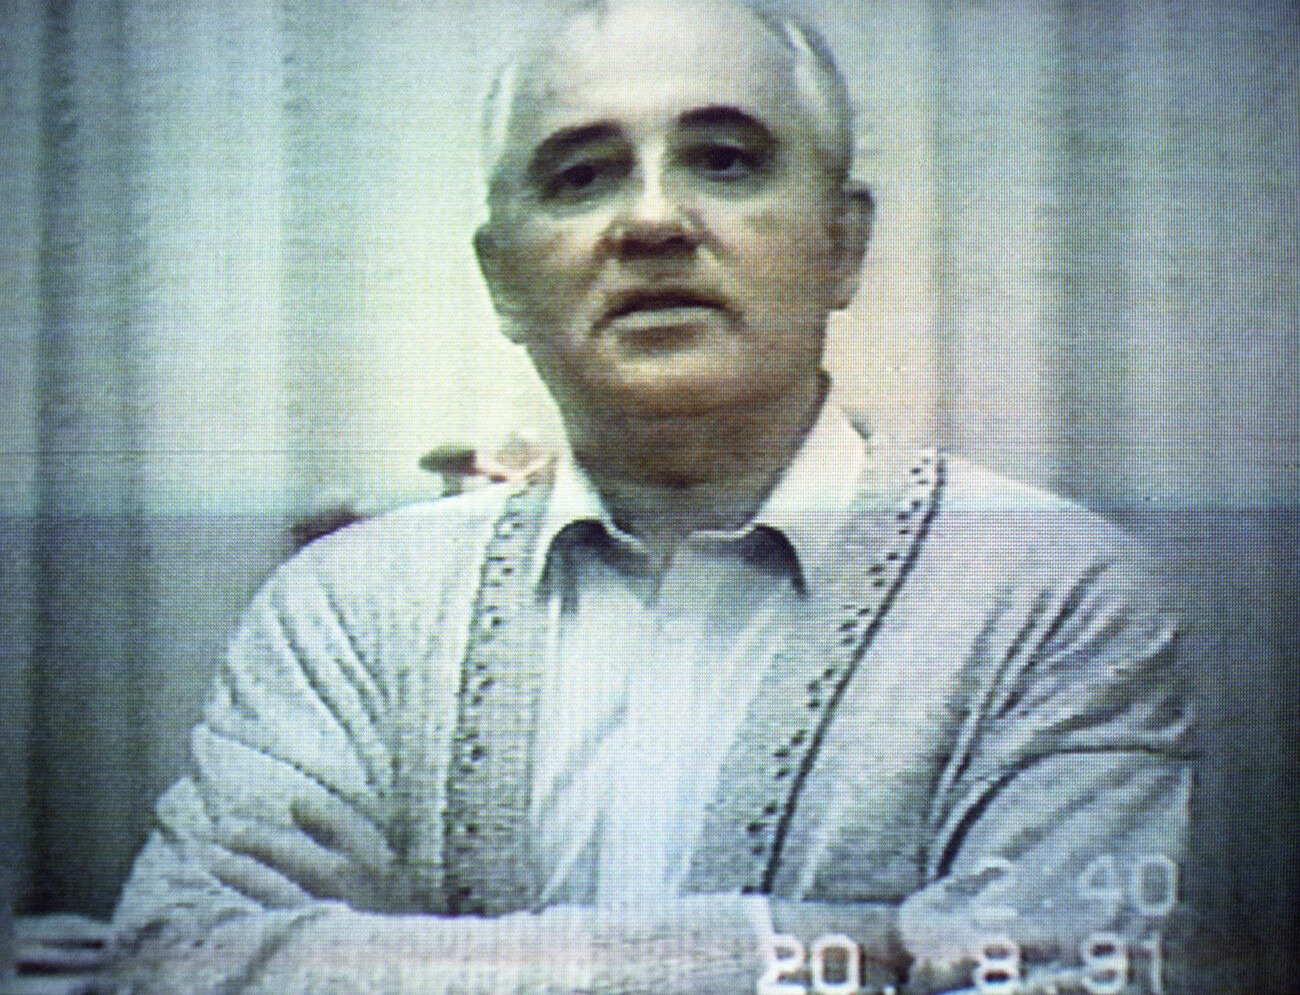 A frame from the video message of the President of the USSR Mikhail Gorbachev to the people, recorded on August 20, 1991 during his house arrest at his dacha in Foros.